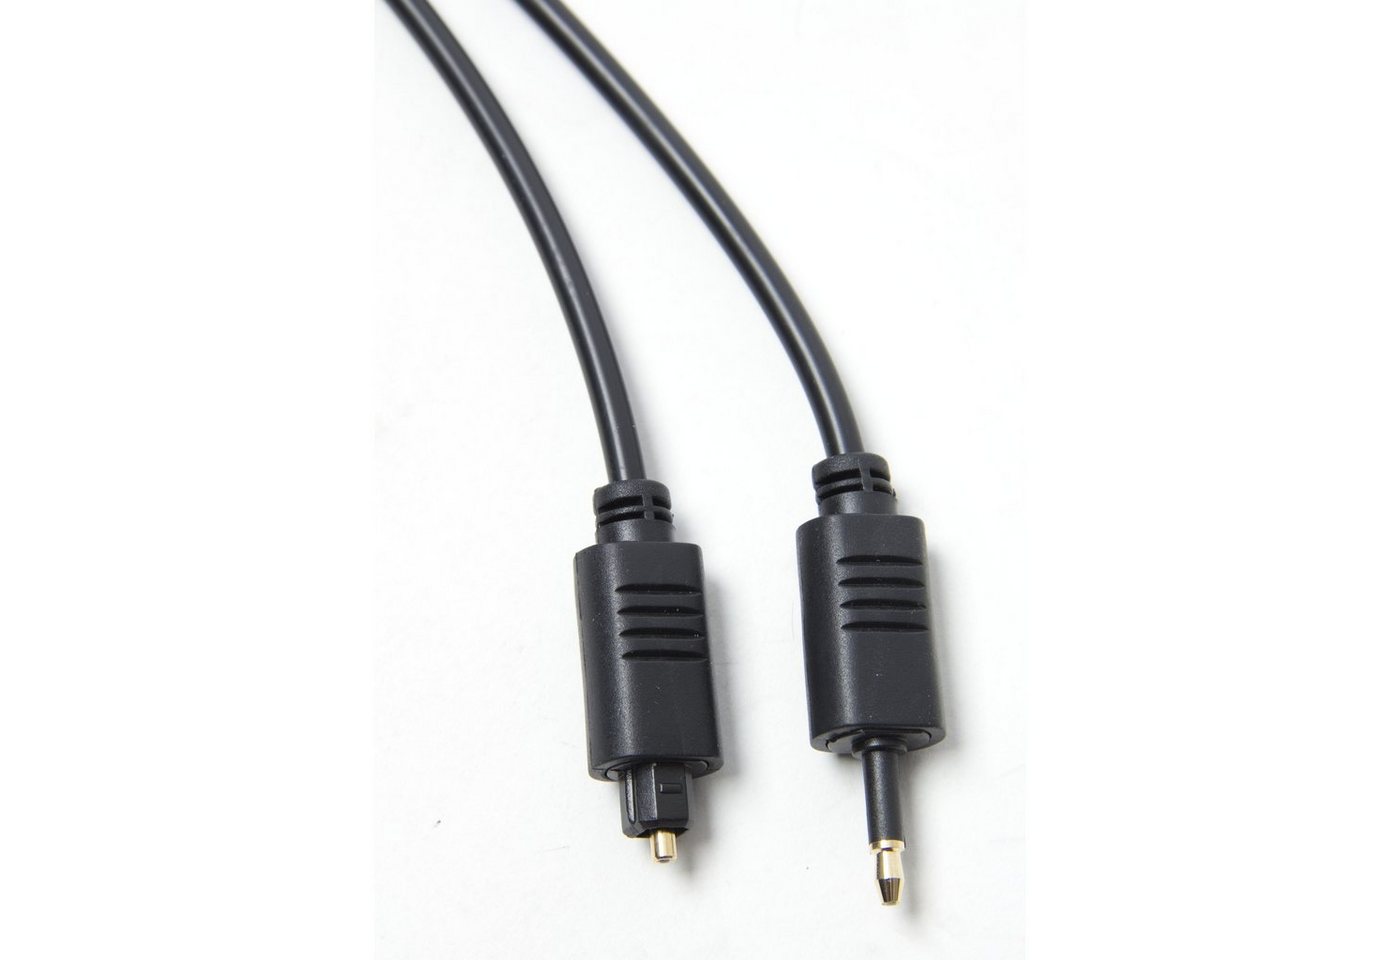 MUSIC STORE Glasfaserkabel, 1m Optical Cable, Reliable Quality von MUSIC STORE